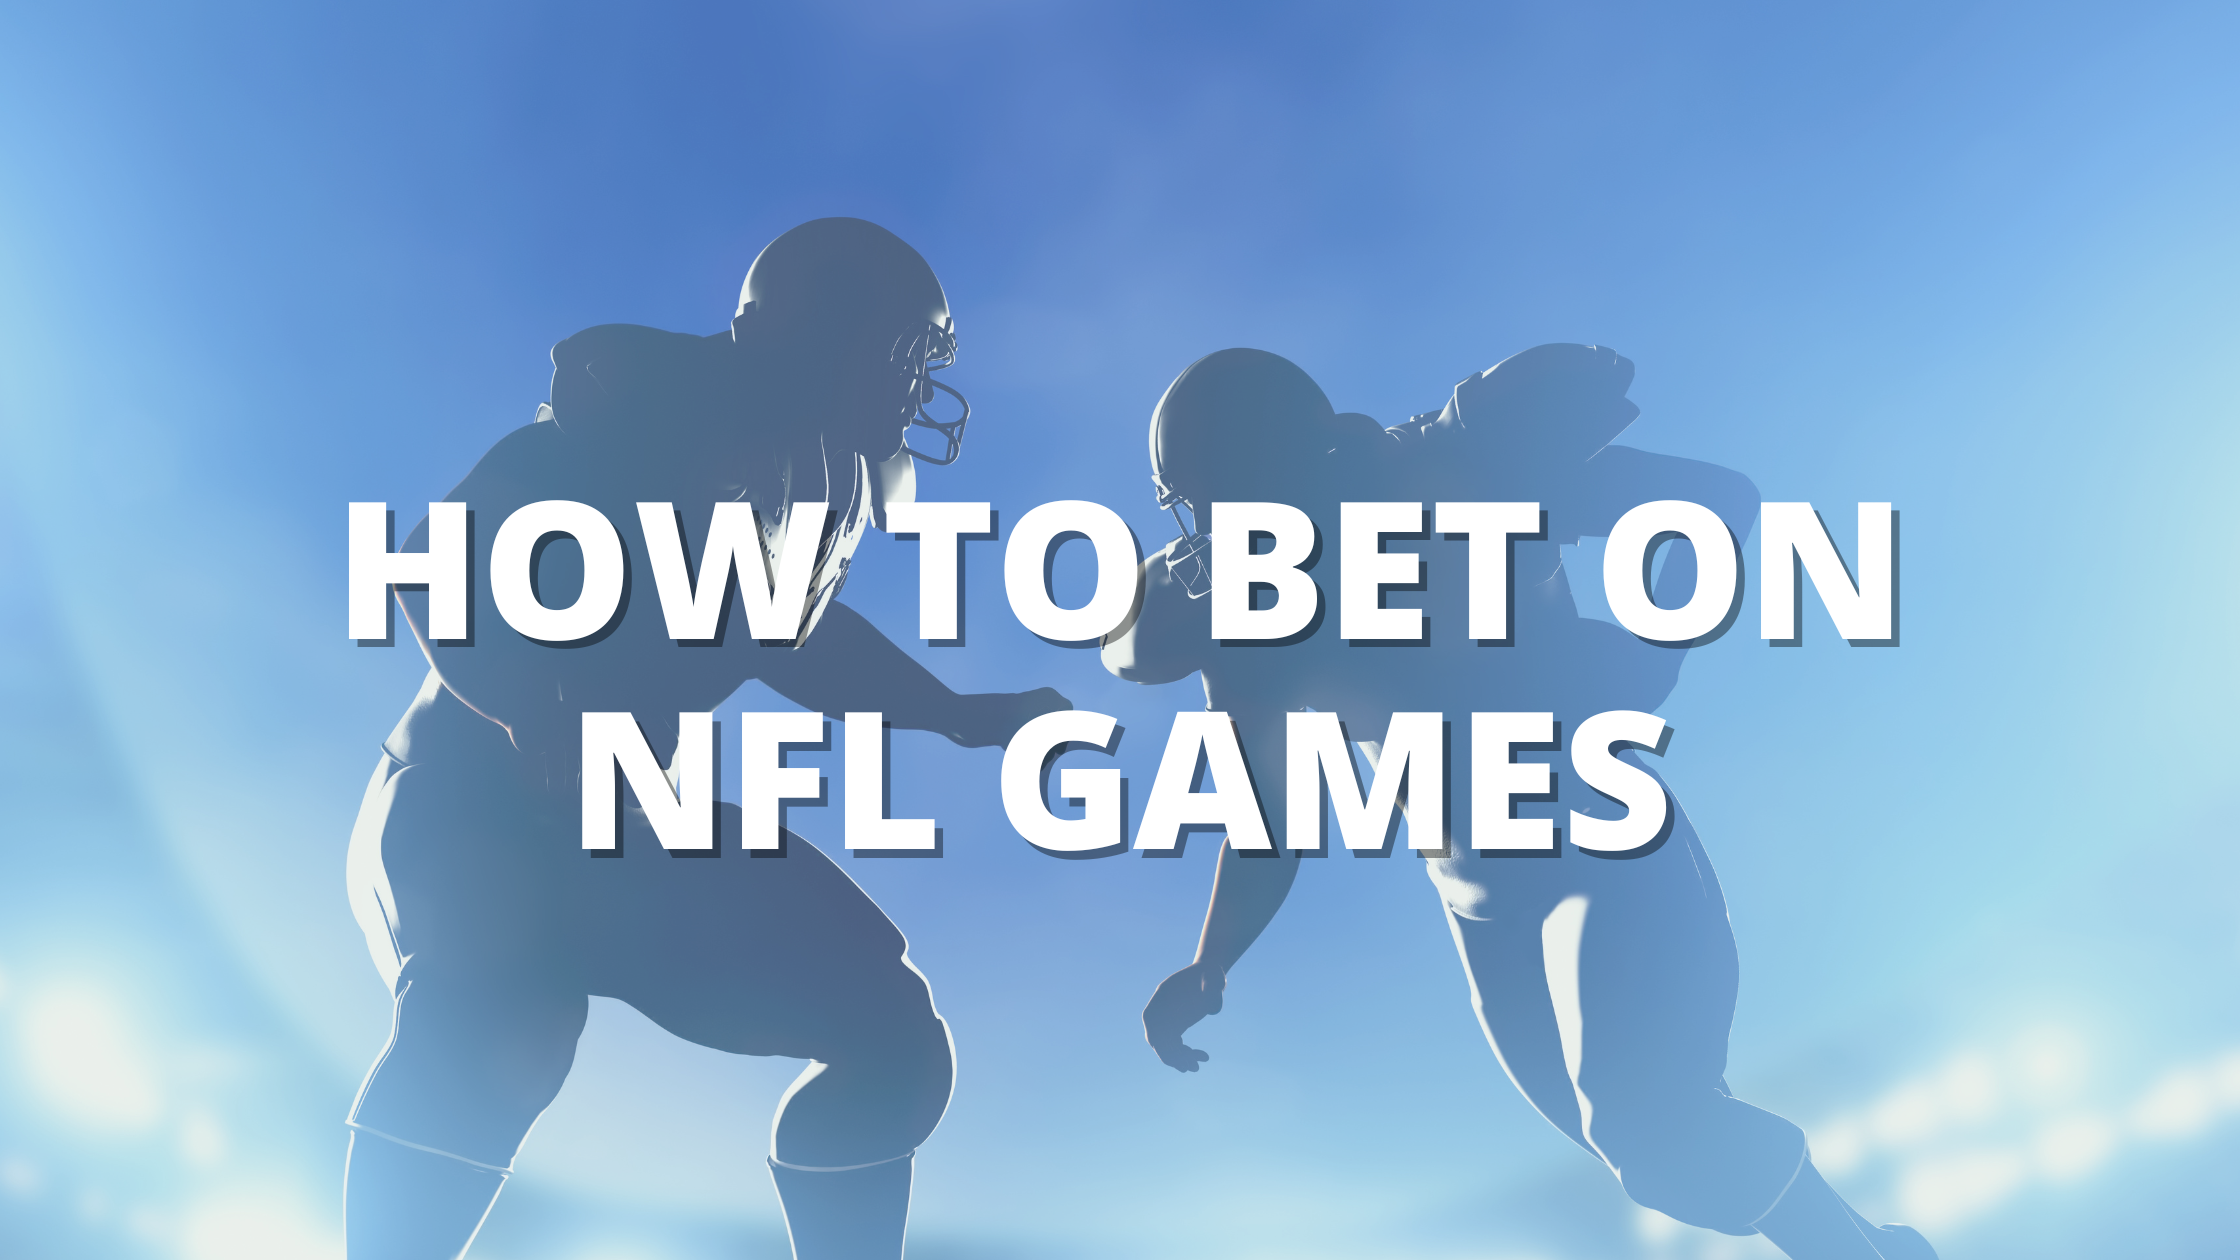 How to Bet on NFL Games